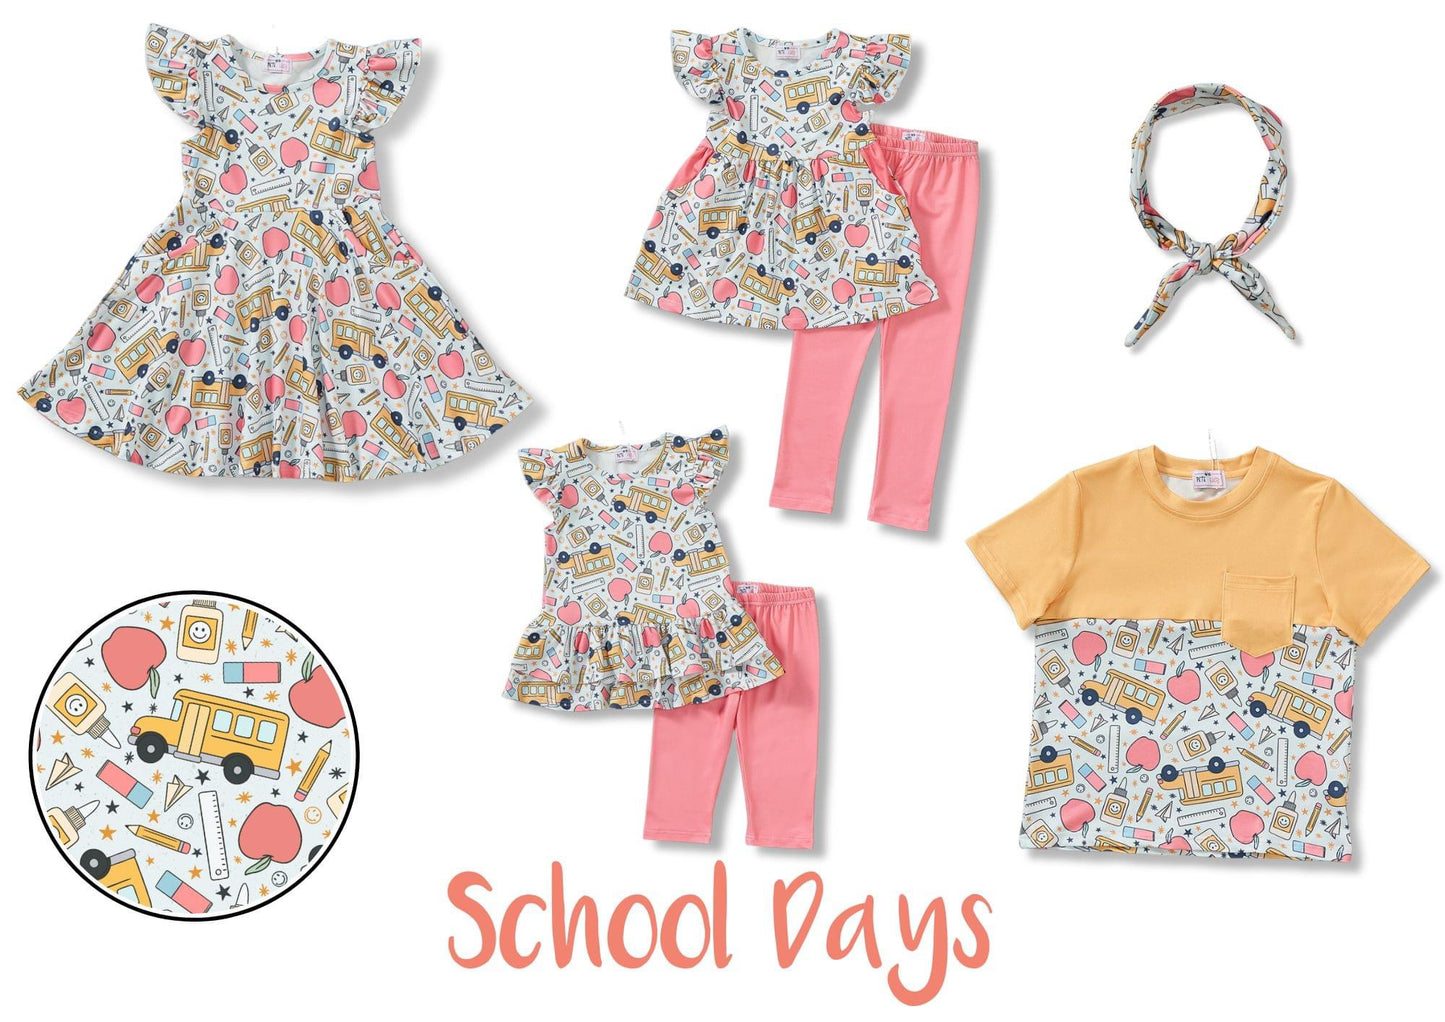 (Preorder) School Days Shirt by Pete + Lucy